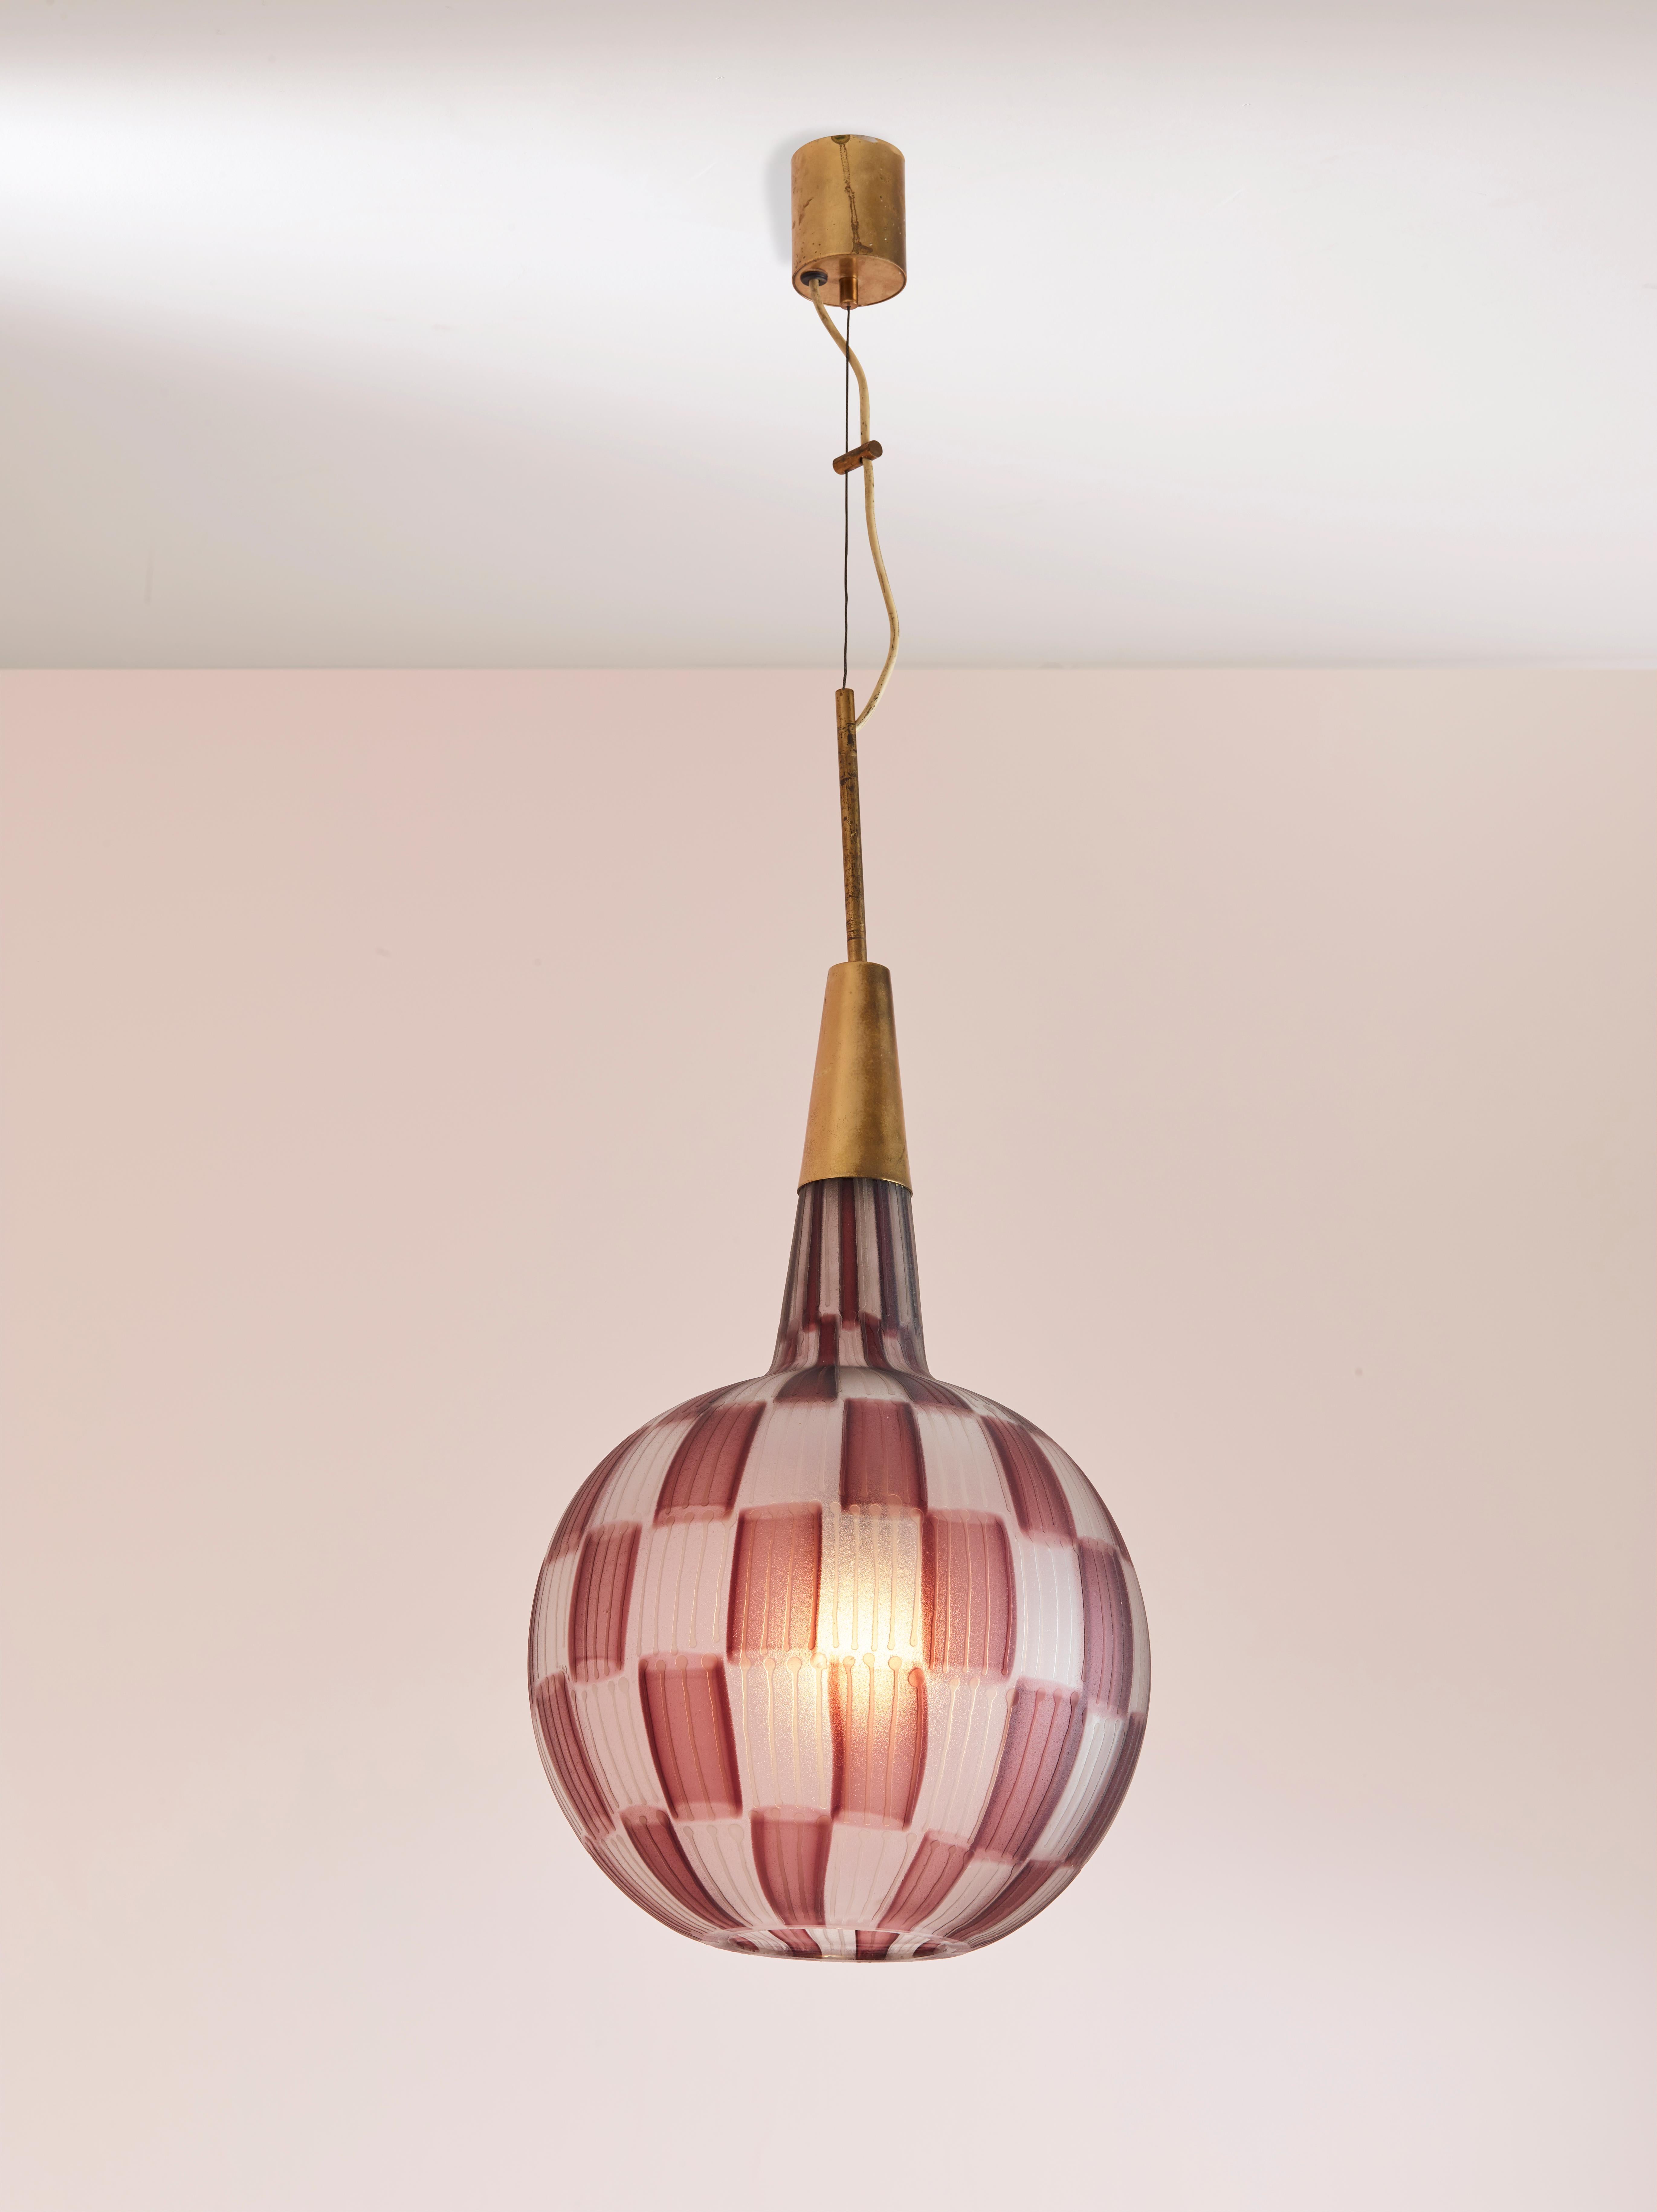 A rare pendant light designed by Tea Morosati and manufactured by Stilnovo in the early 1960s.

This particular Stilnovo lighting fixture has a very elegant brass structure with a diffuser in etched glass handblown by the renewed glassmaker Barovier